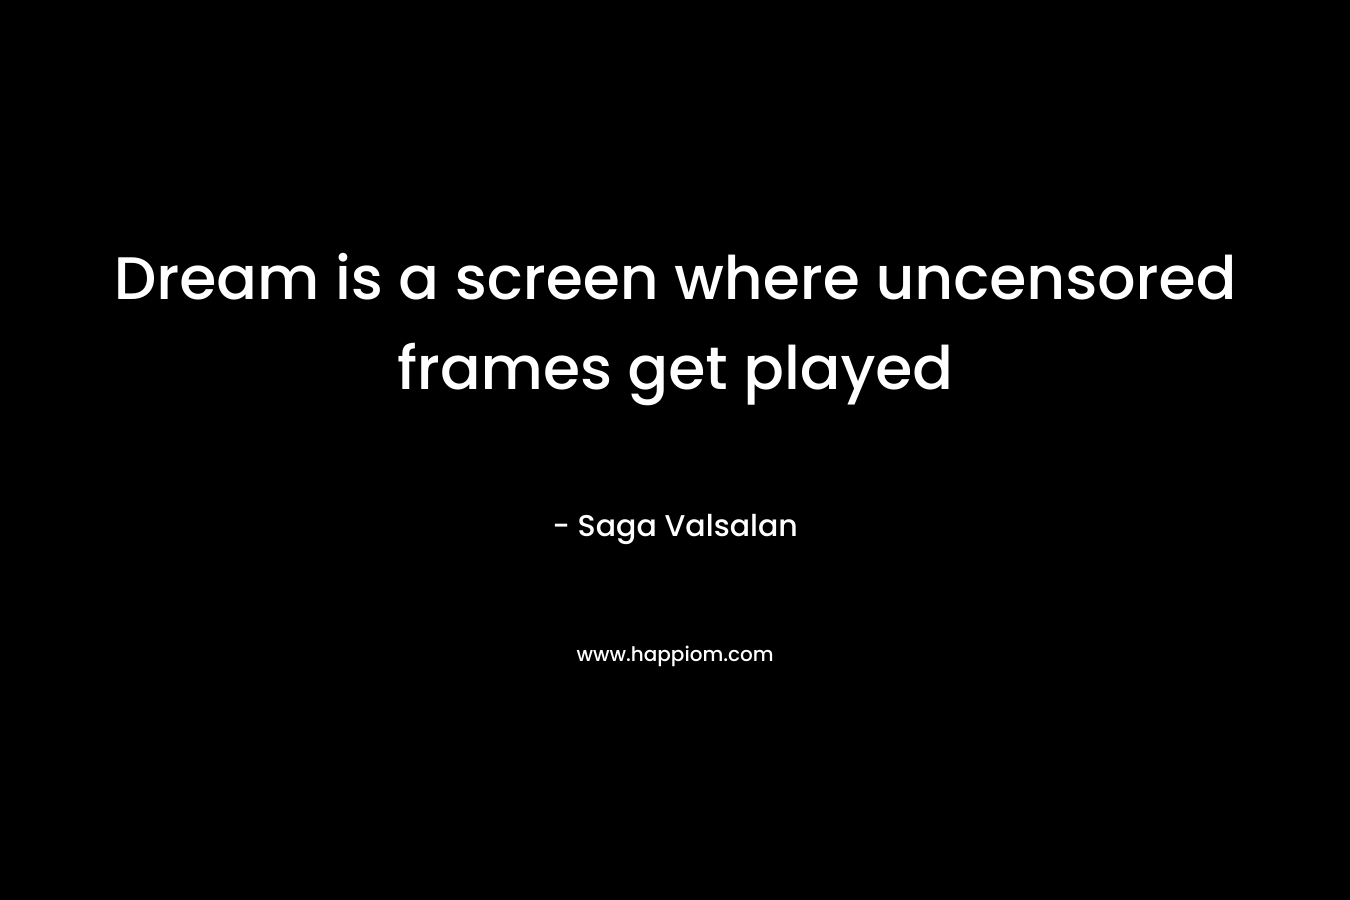 Dream is a screen where uncensored frames get played